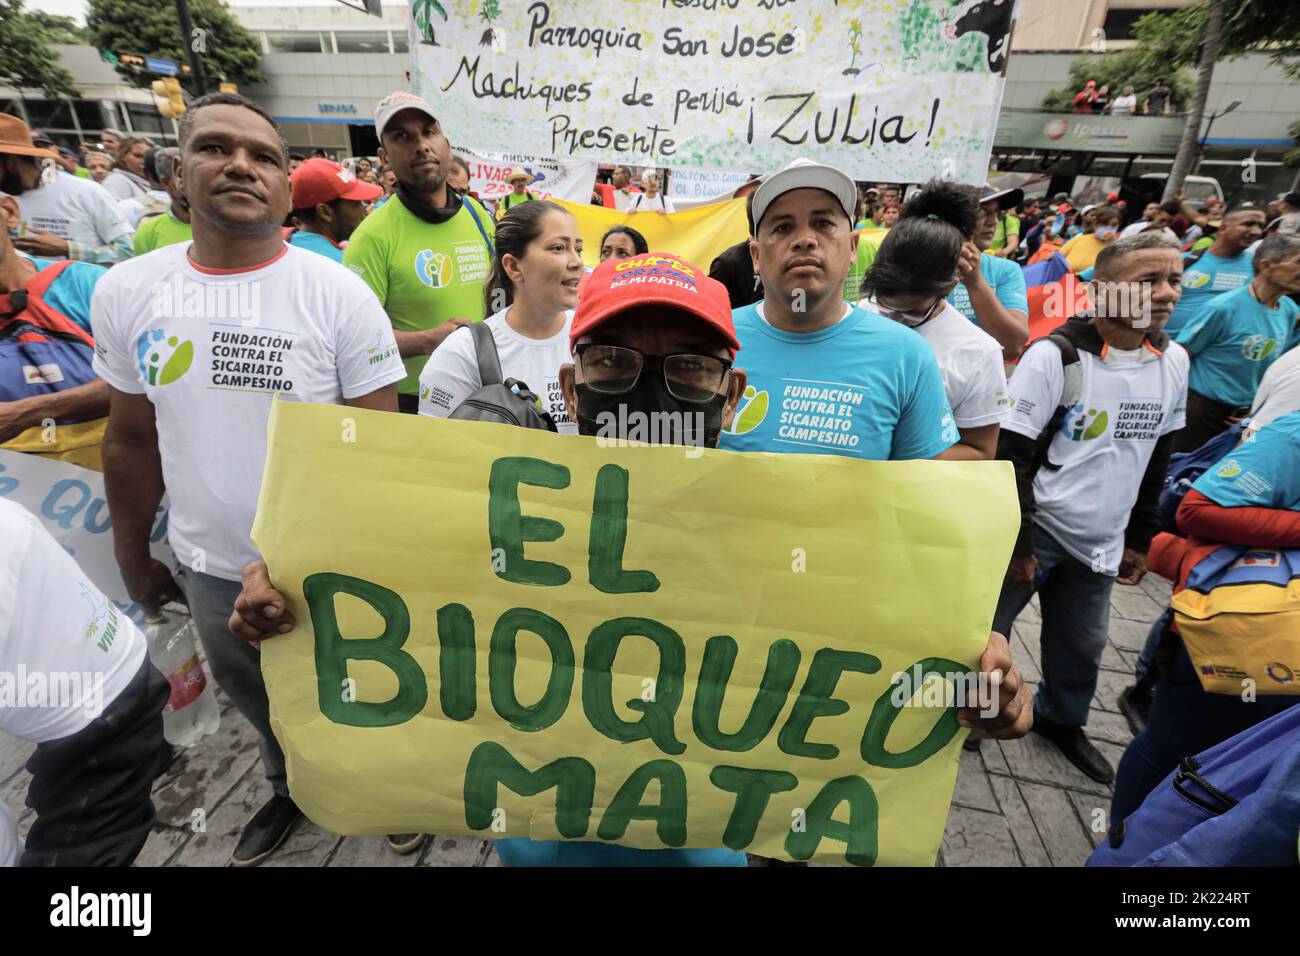 Caracas, Venezuela. 21st Sep, 2022. A man holds a sign reading in Spanish 'El Bloqueo Mata' (The Blockade Kills) during a demonstration against economic sanctions called by peasant movements in front of the UN Mission in Caracas, Venezuela. Credit: Jesus Vargas/dpa/Alamy Live News Stock Photo